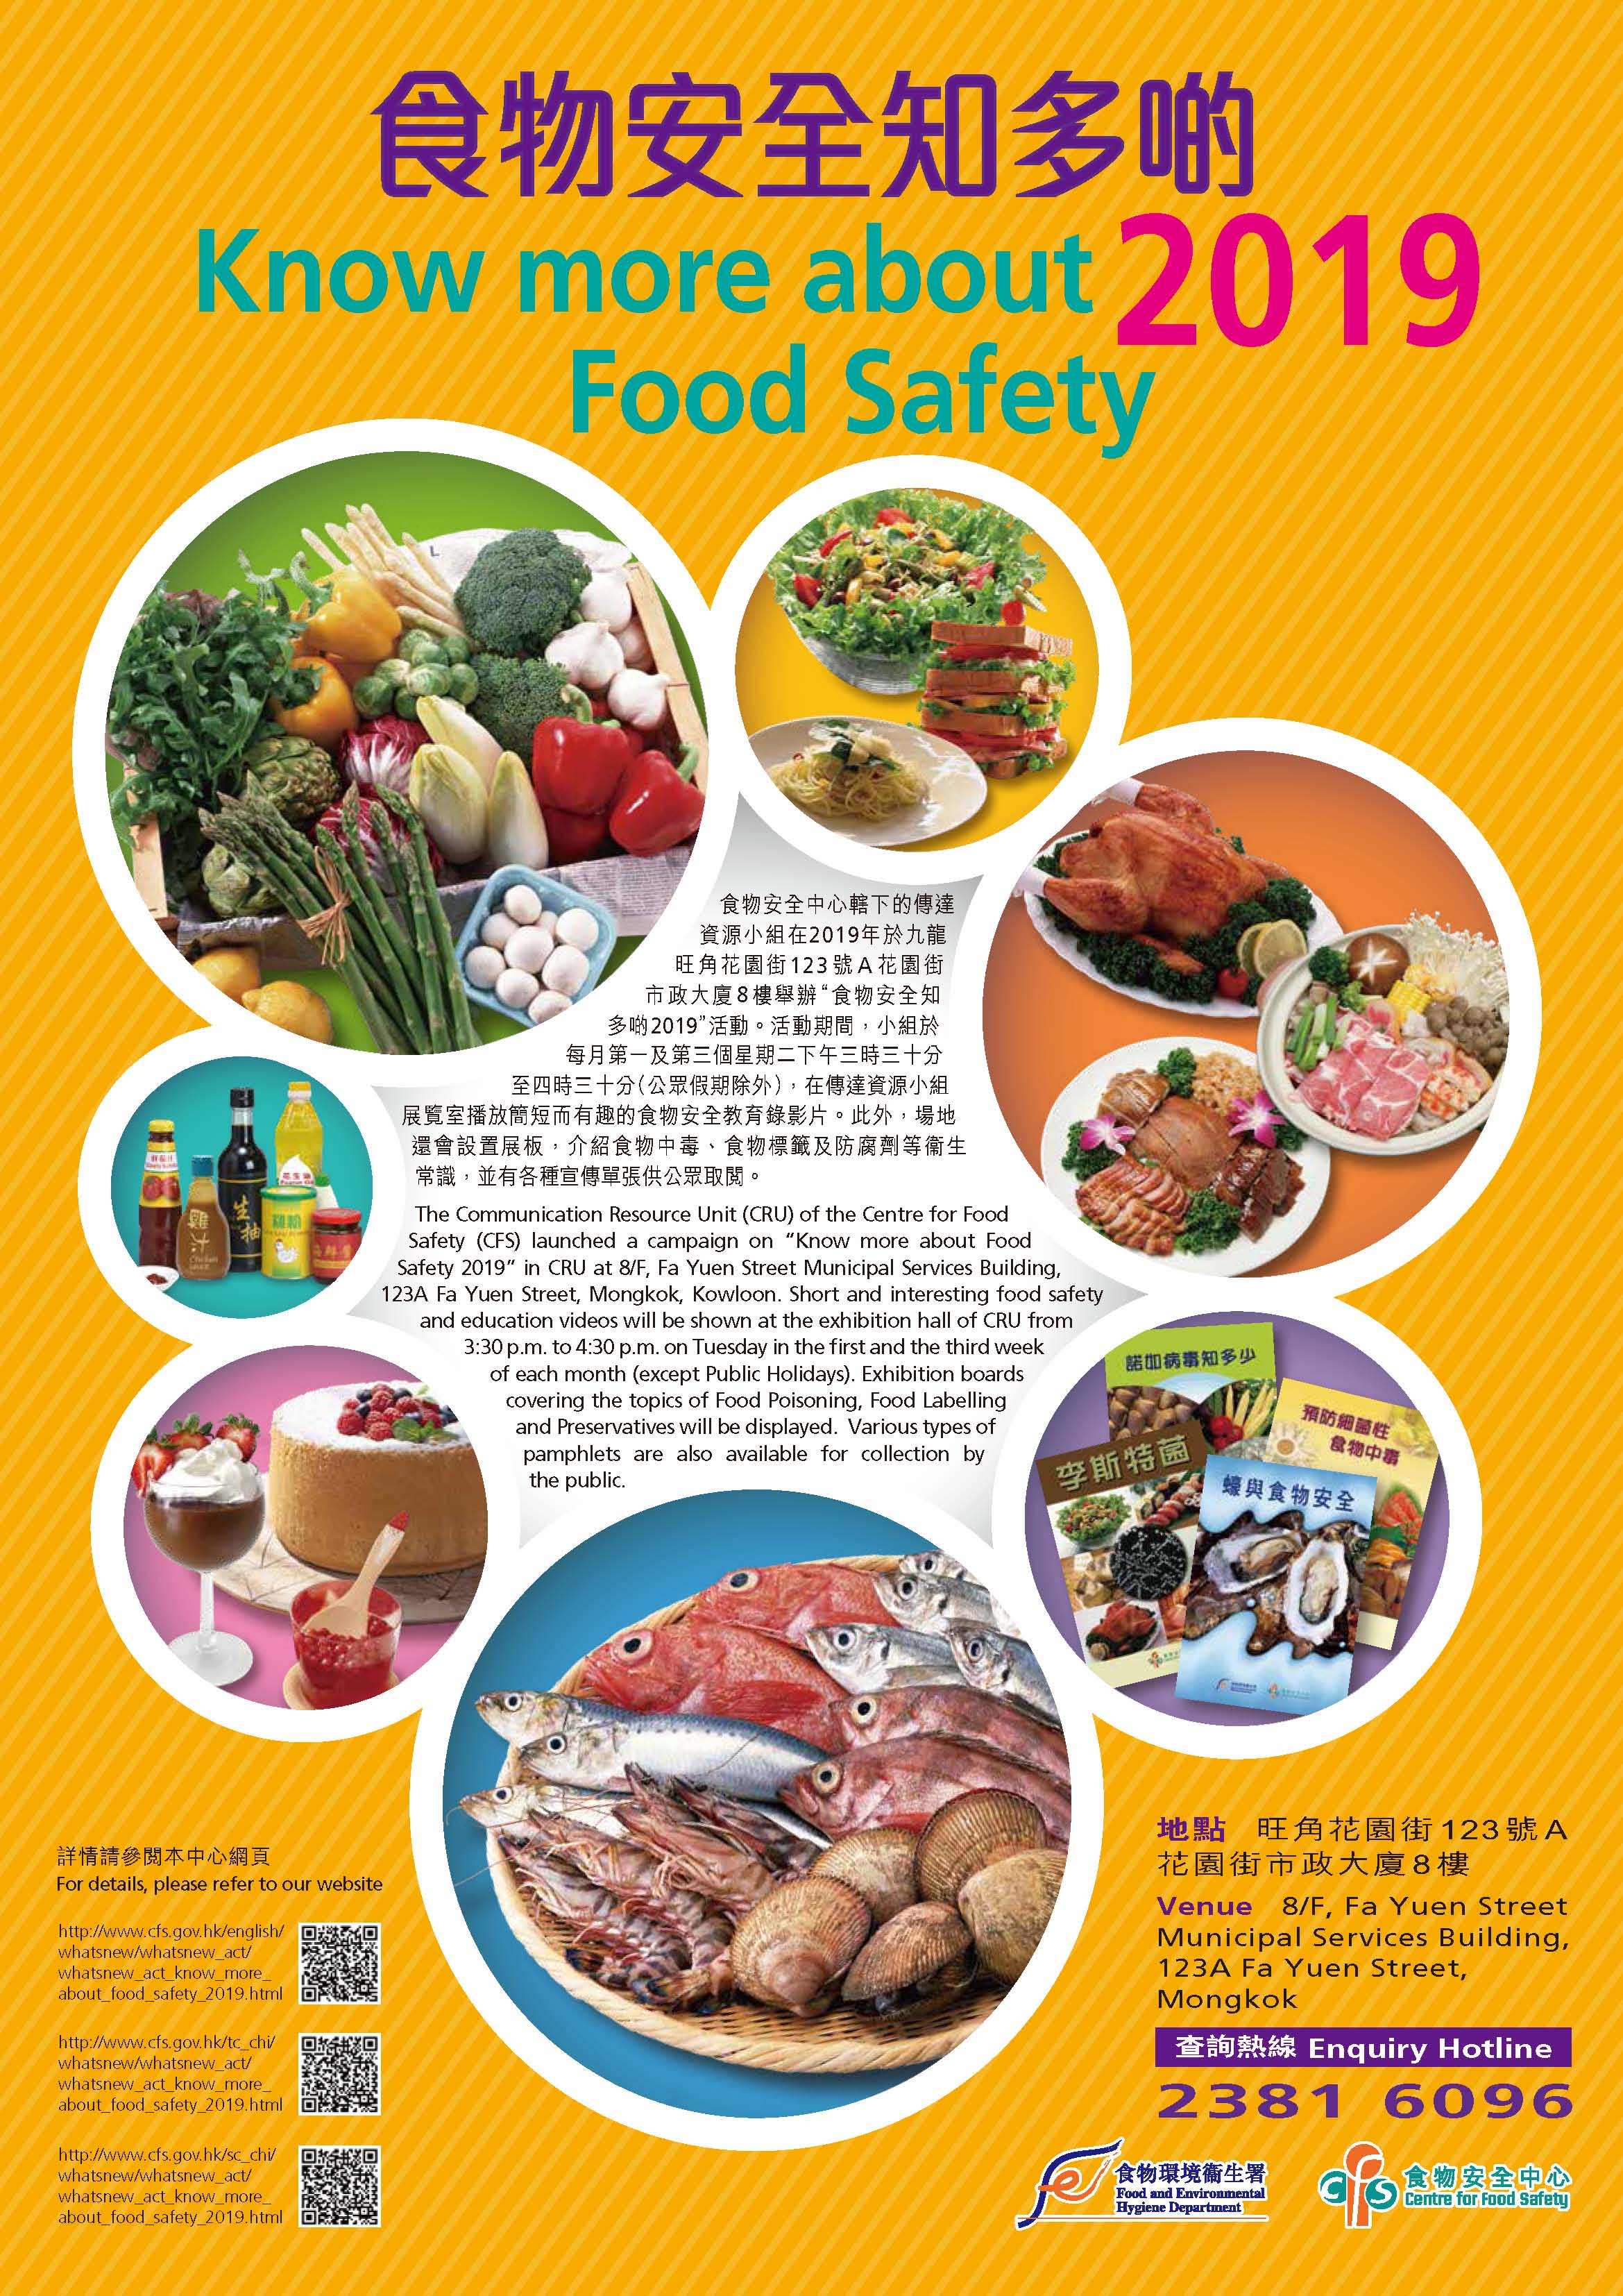 Know more about Food Safety 2019 Poster